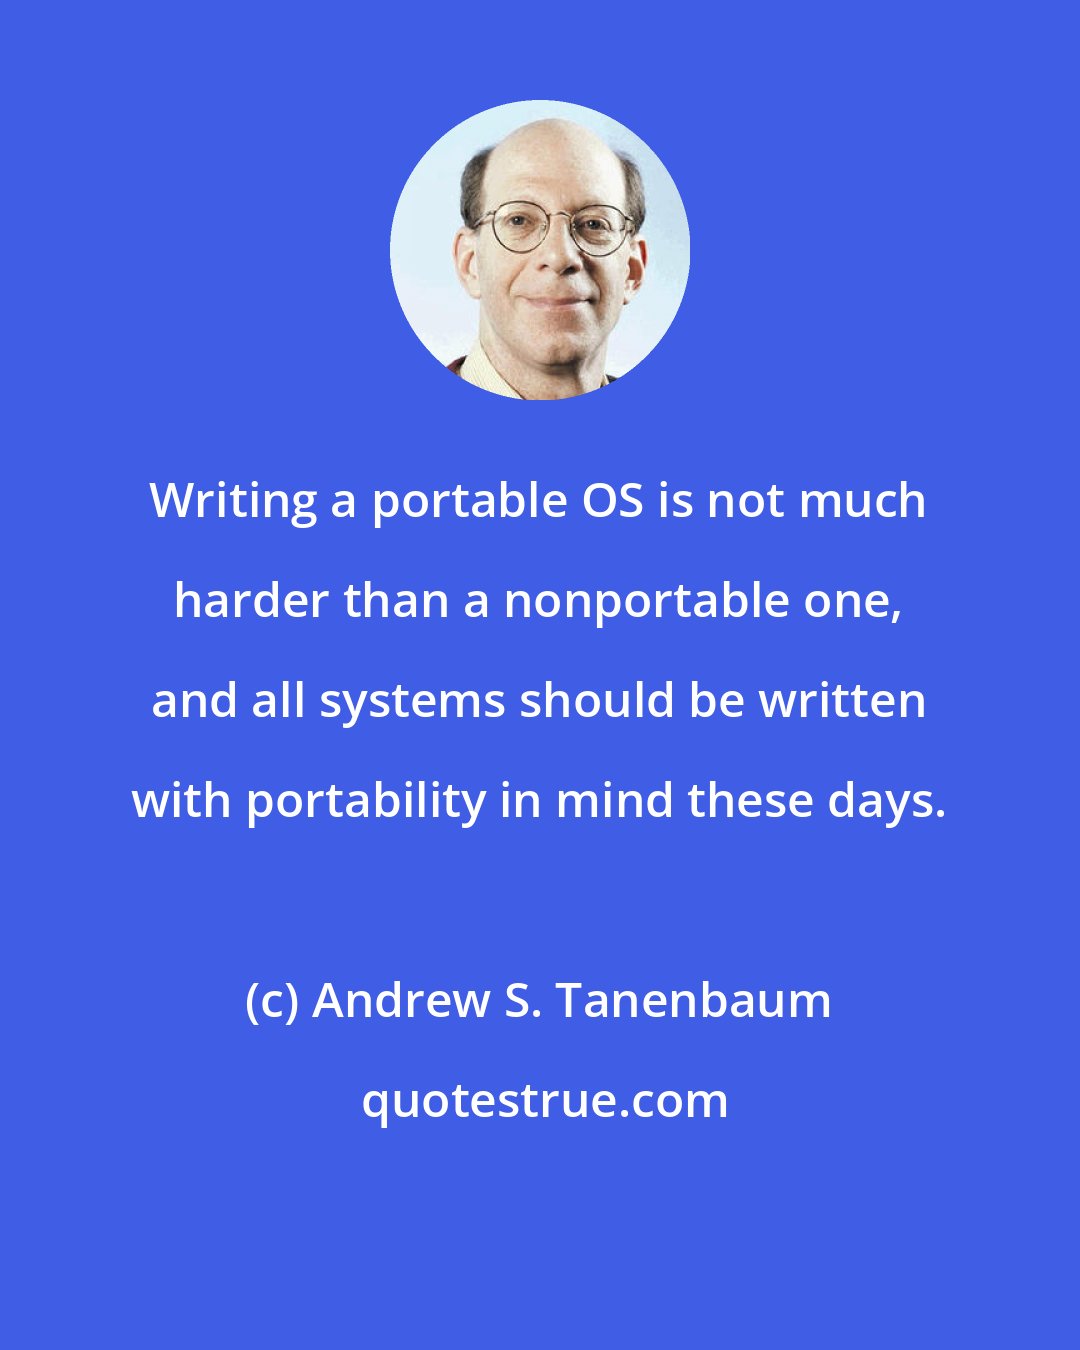 Andrew S. Tanenbaum: Writing a portable OS is not much harder than a nonportable one, and all systems should be written with portability in mind these days.